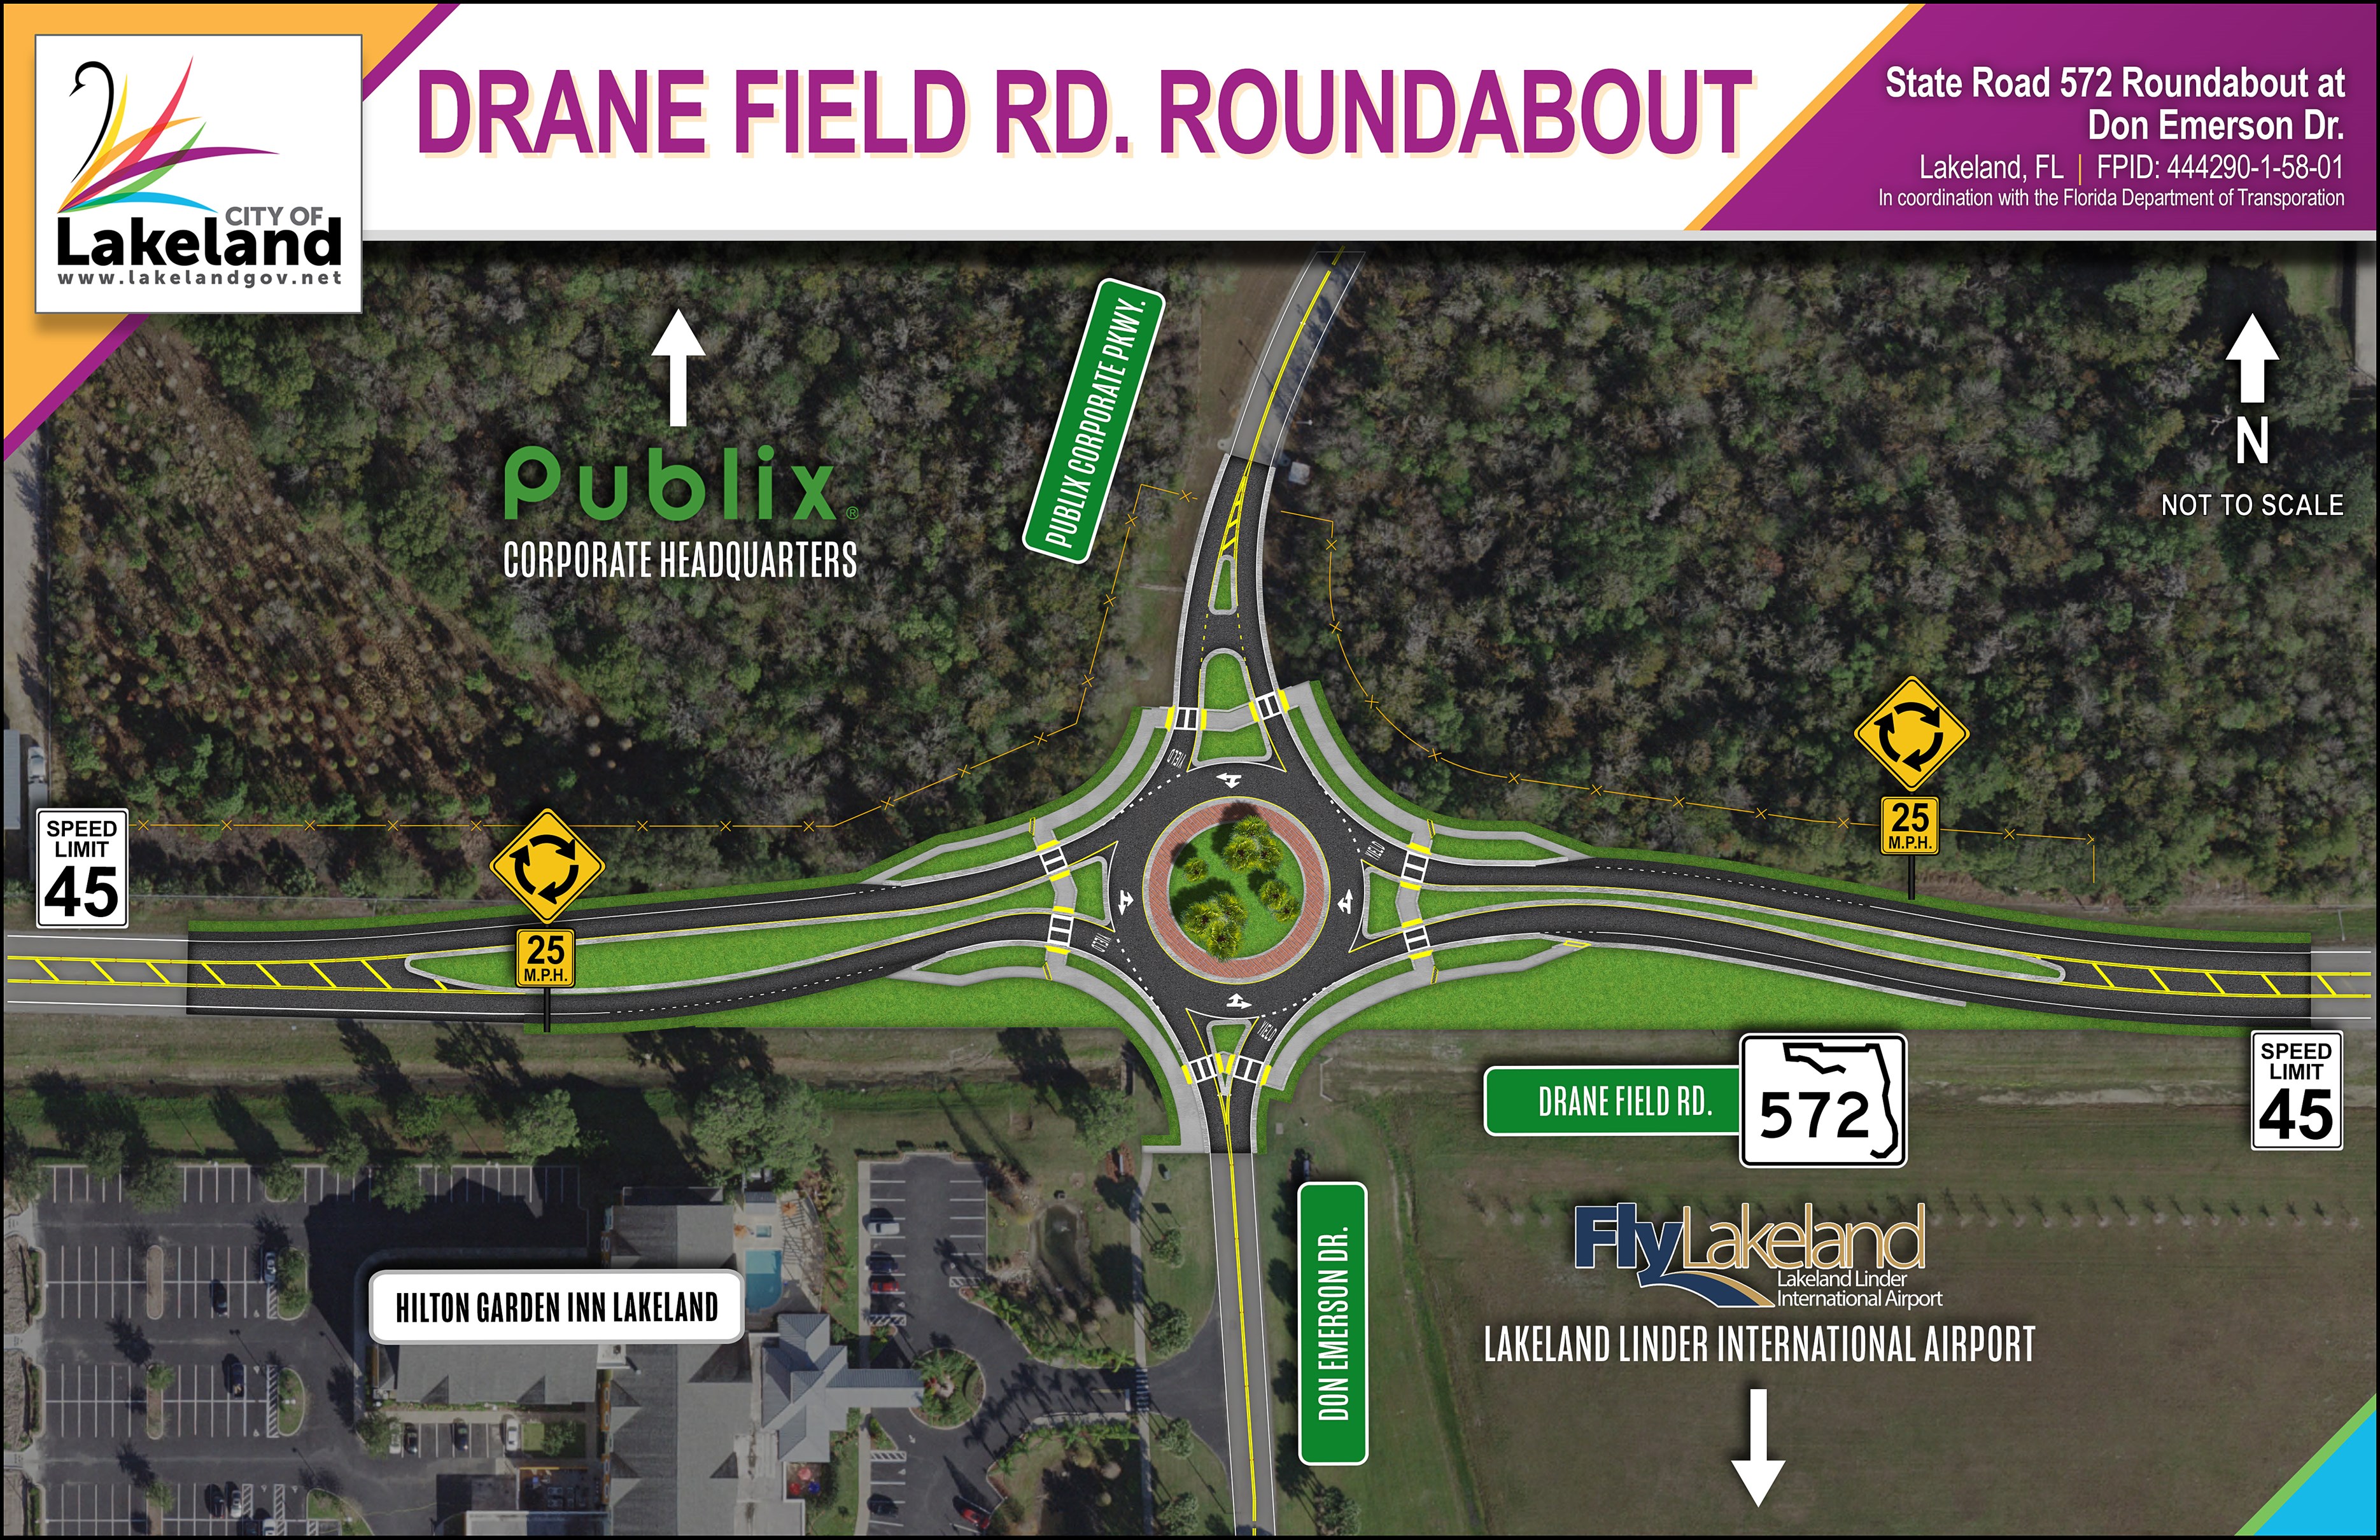 Drane Field Road Roundabout layout aerial view